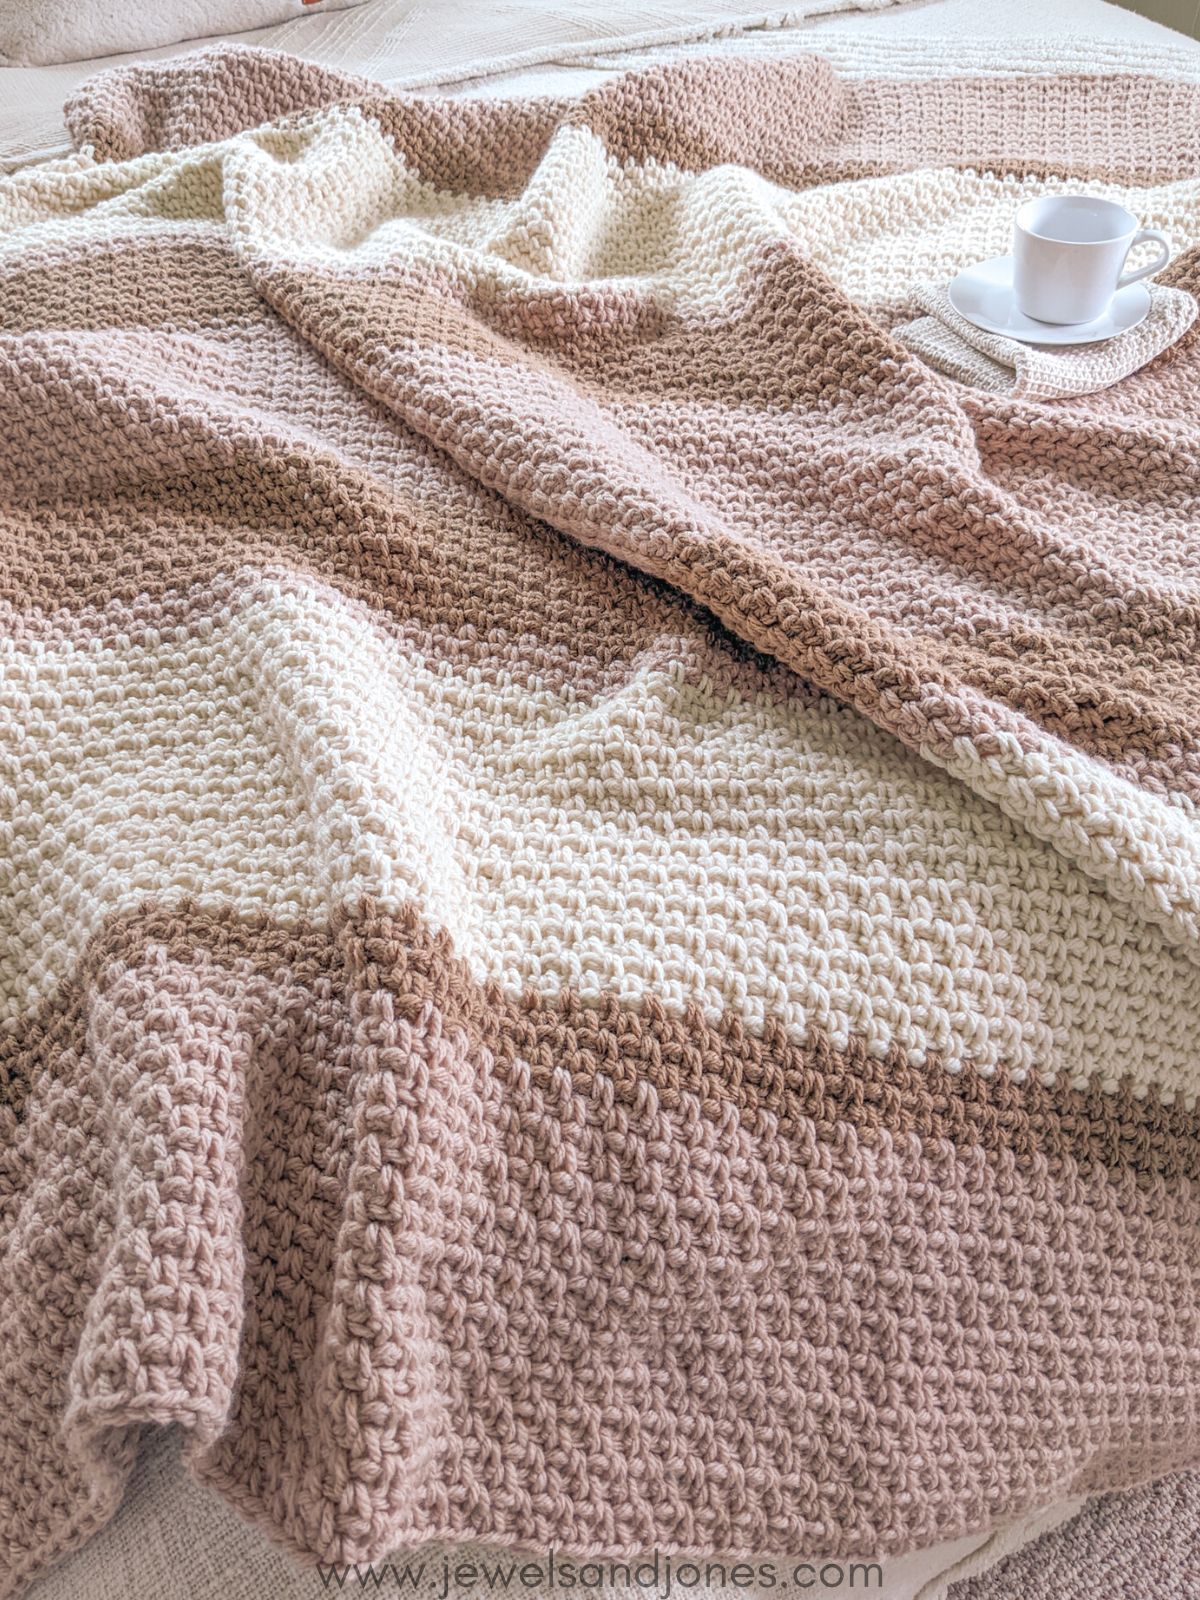 A mixed color crochet blanket that uses the moss stitch.